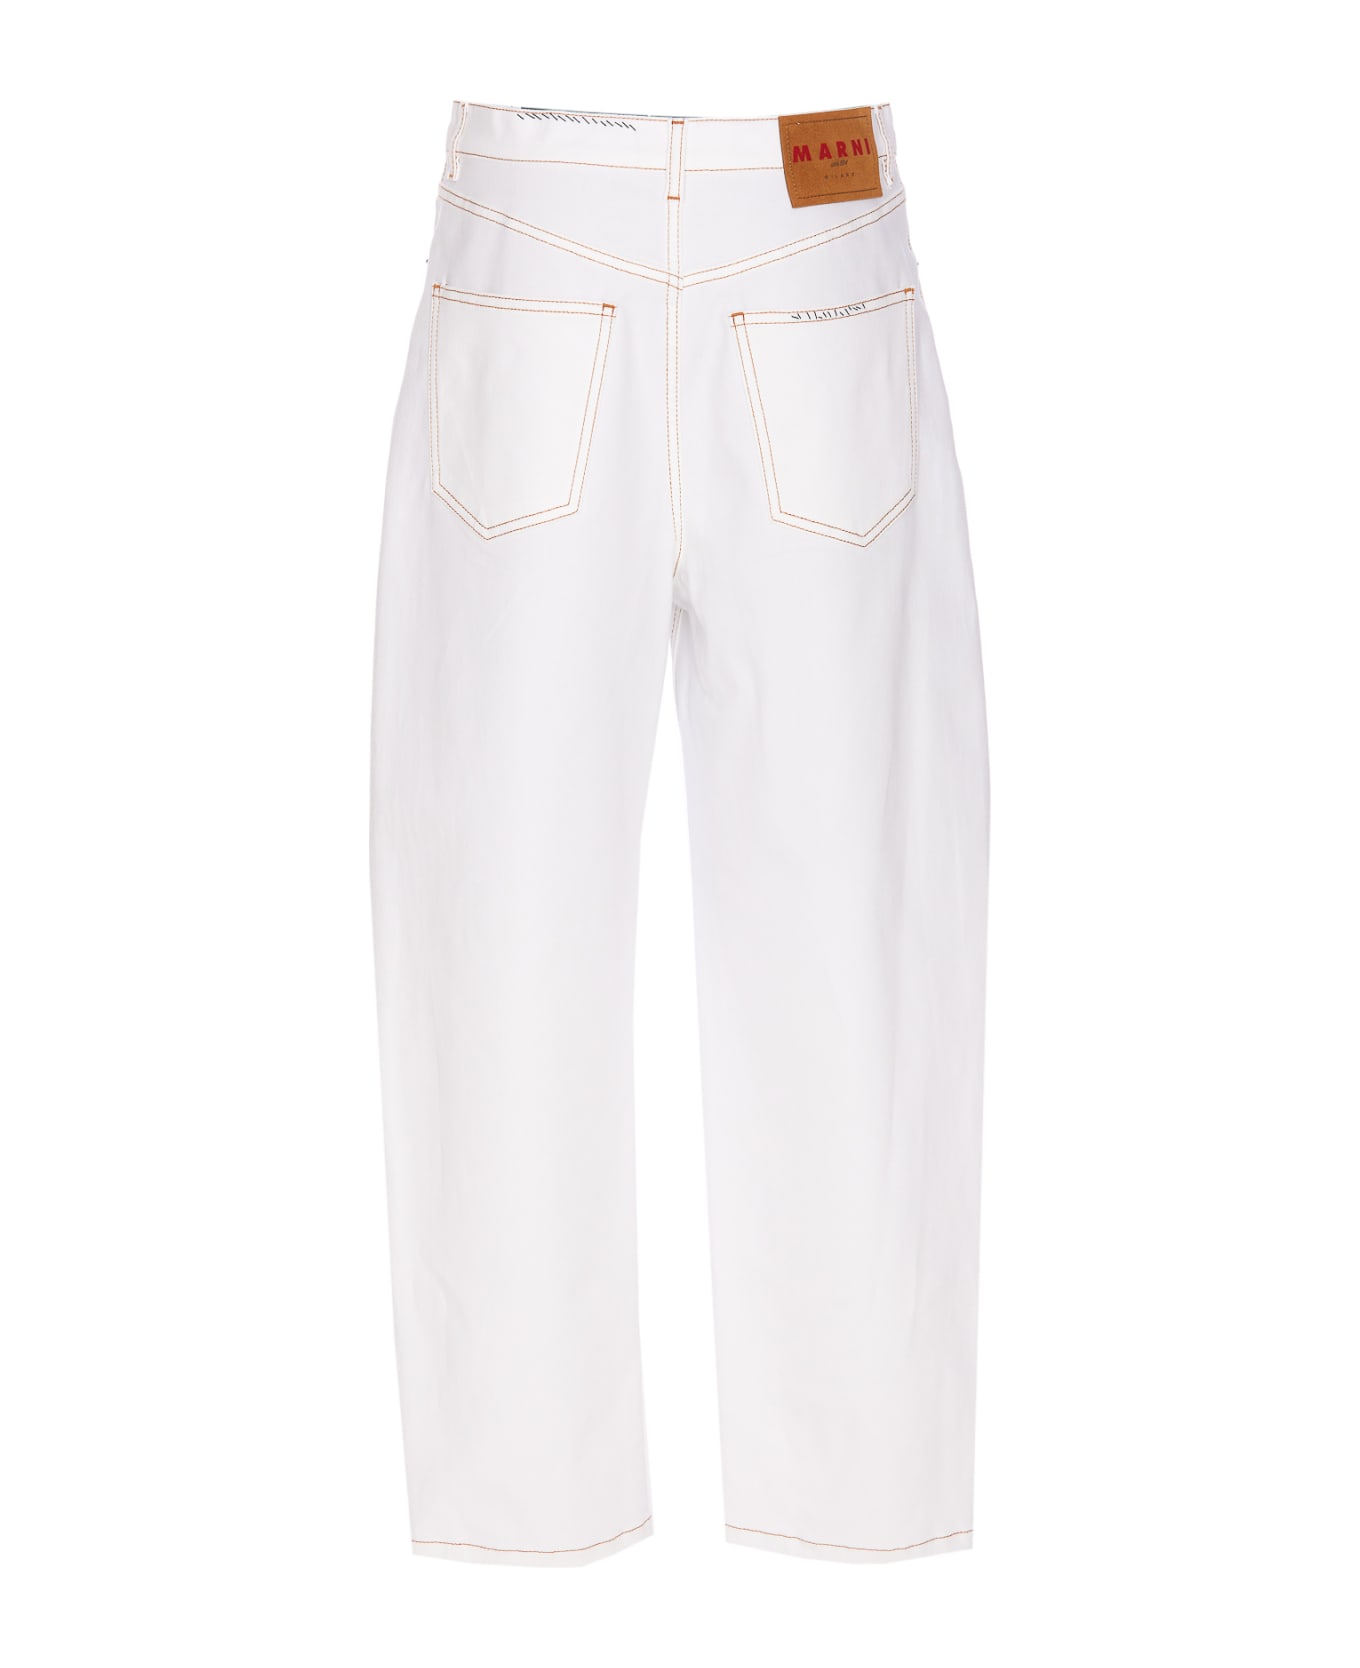 Marni Denim Pants With Flower Patch - White